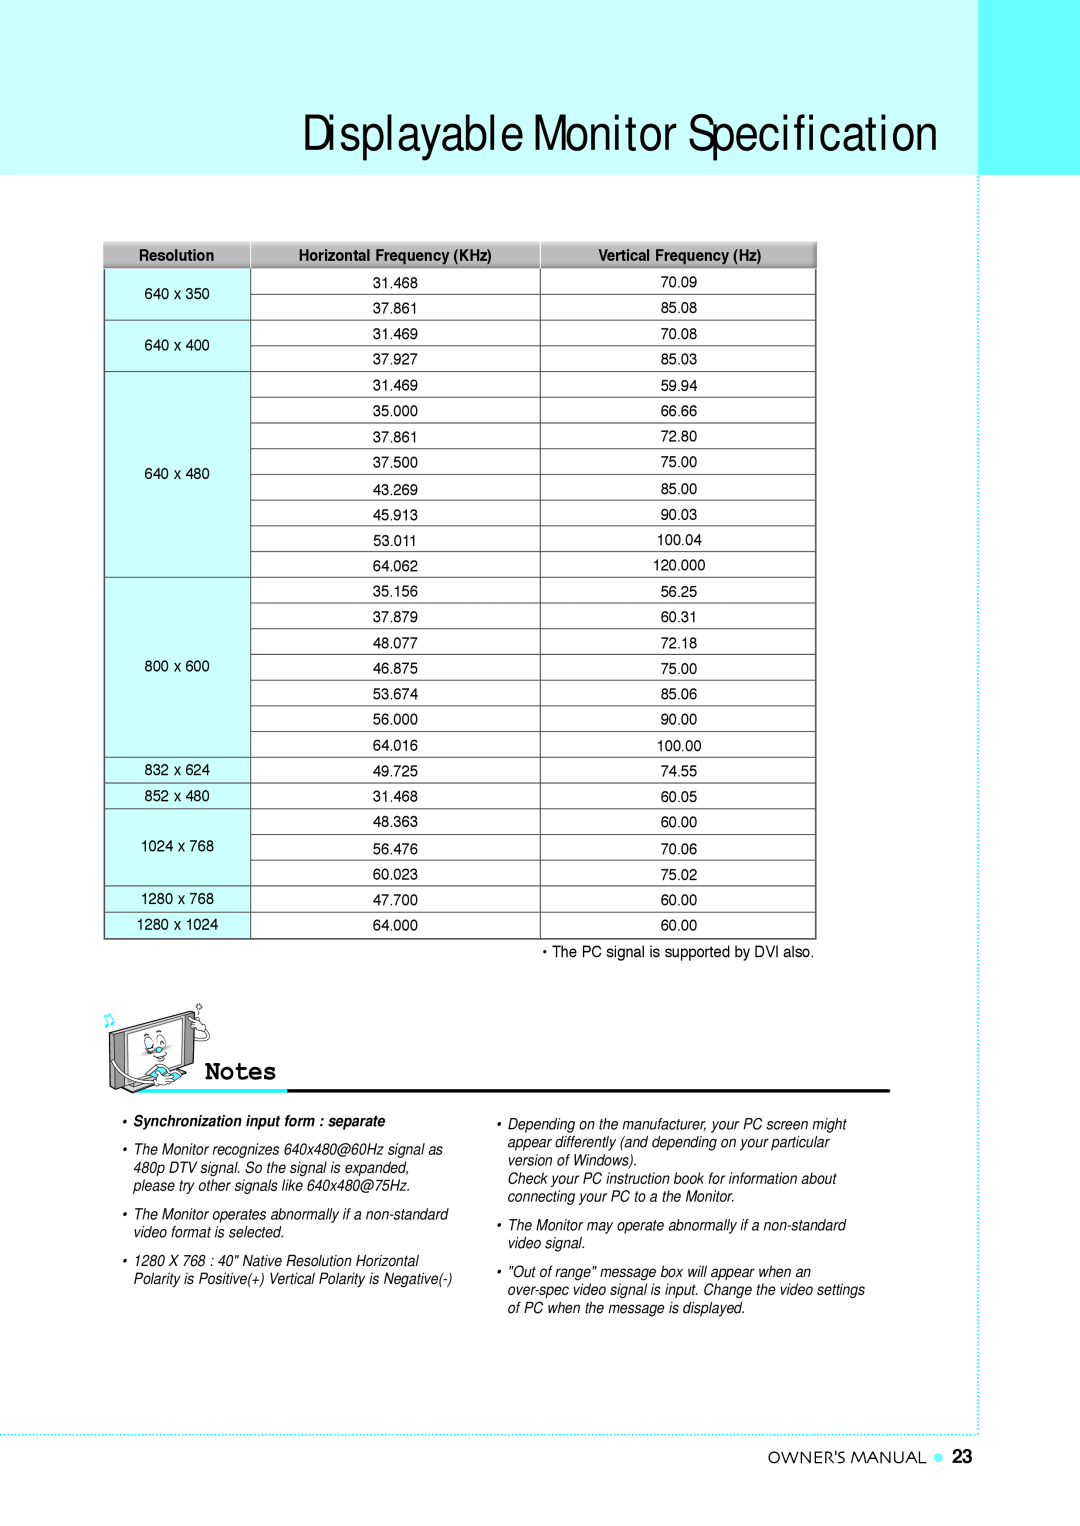 InFocus TD32 Displayable Monitor Specification, Owners Manual, Vertical Frequency Hz, Synchronization input form separate 